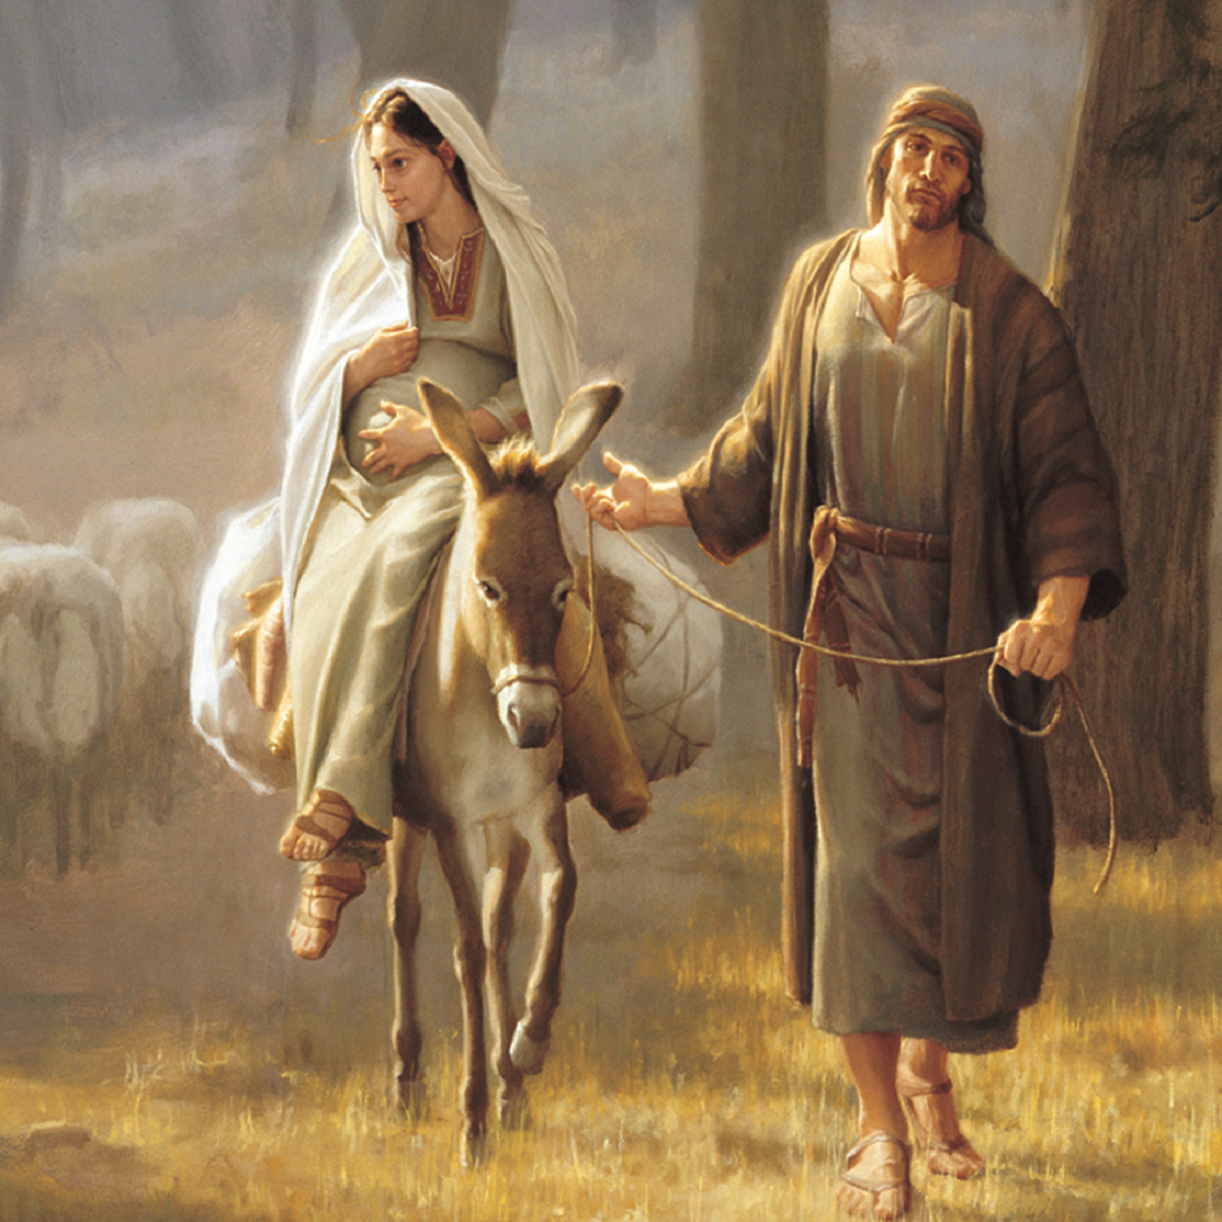 [Joseph%2520and%2520Mary%2520traveling%2520to%2520Bethlehem.%2520Nativity%255B103%255D.png]